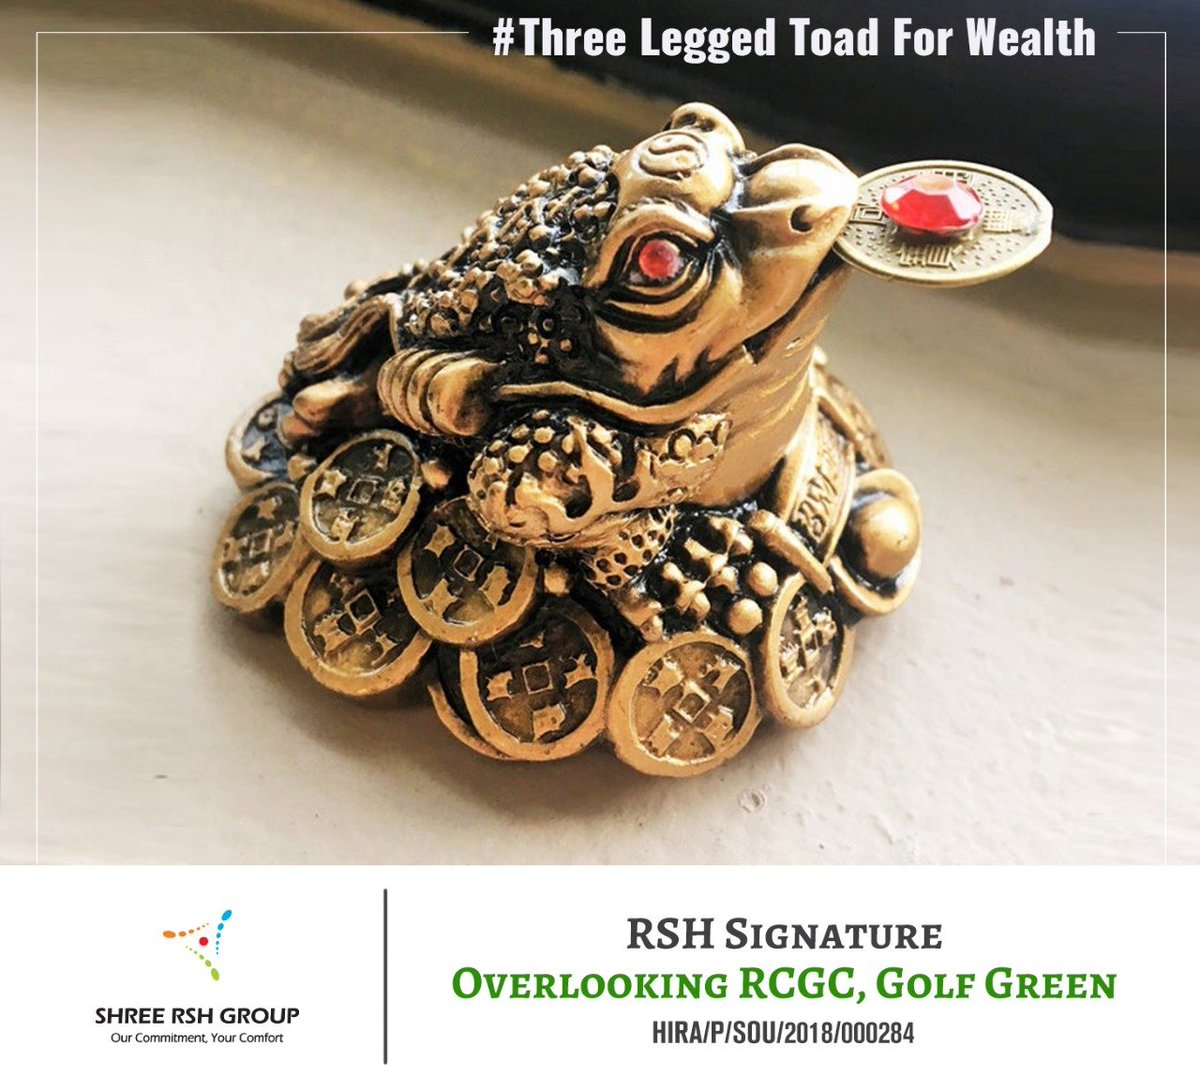 #FengShuiTip | Keep a three-legged toad inside your house - under the sofa or chair. Display this creature wherever you want wealth to find you. 

#ShreeRSHGroup #RSHSignature #FengShui #Wealth #ThreeLeggedToad #Prosperity #FlatsInSouthKolkata #LuxuryApartments #Gym #Workout